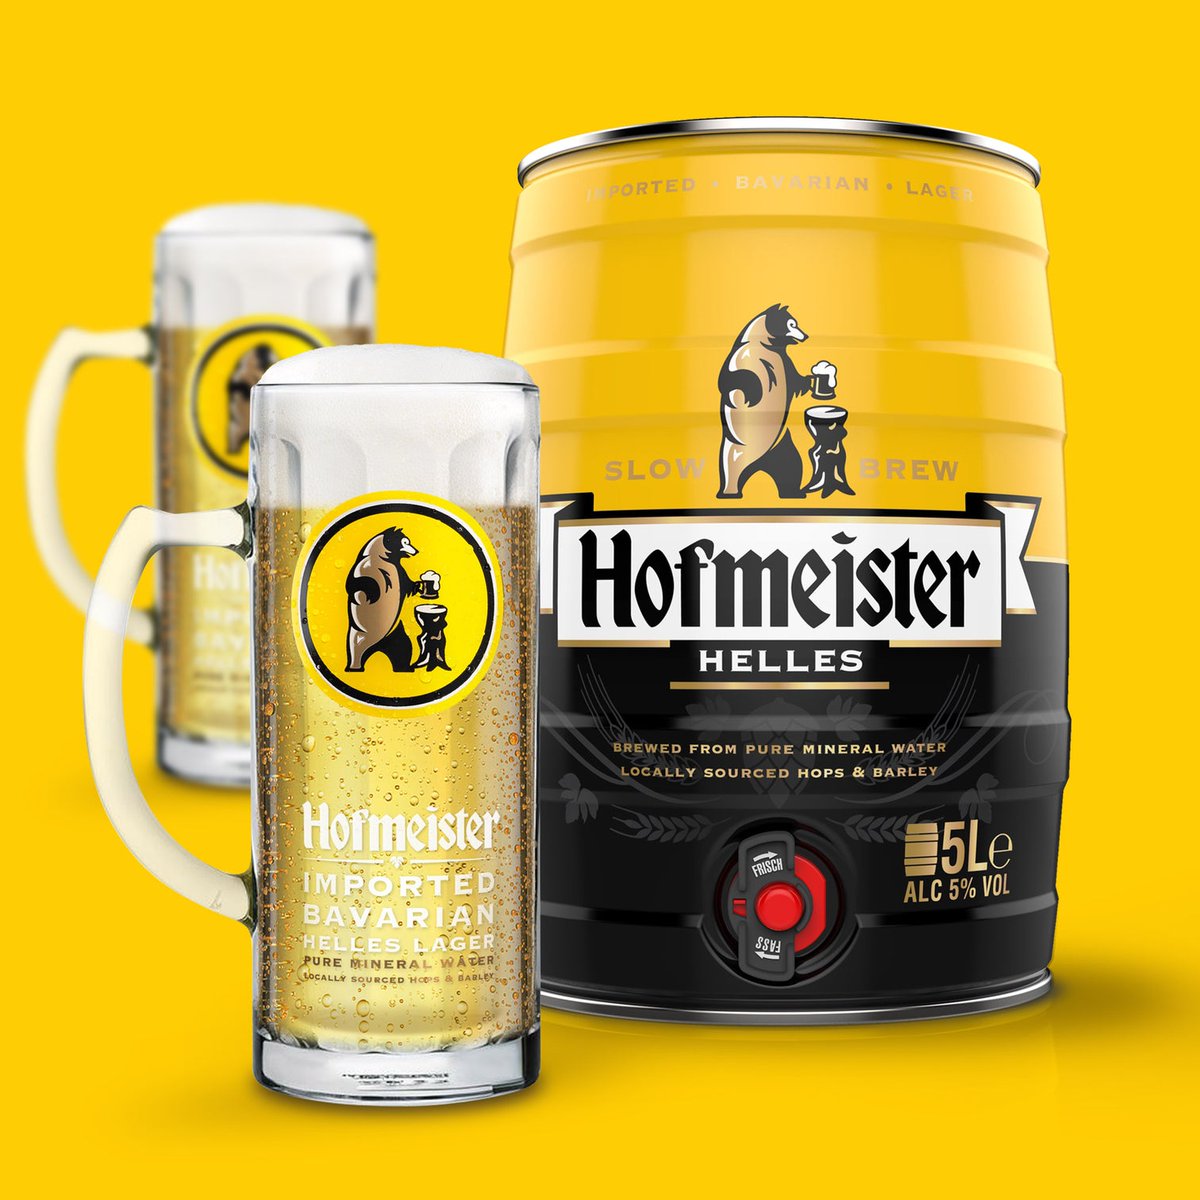 HERE WE GO!! We've teamed up with the wonderful people over at Hofmeister for this weeks giveaway! 1 lucky winner will receive a 5L mini keg along with 2 steins to polish it off! Just follow these simple steps 👇🏻

Follow us and @hofmeister_beer 
Like ❤️ and share 🔄 this post